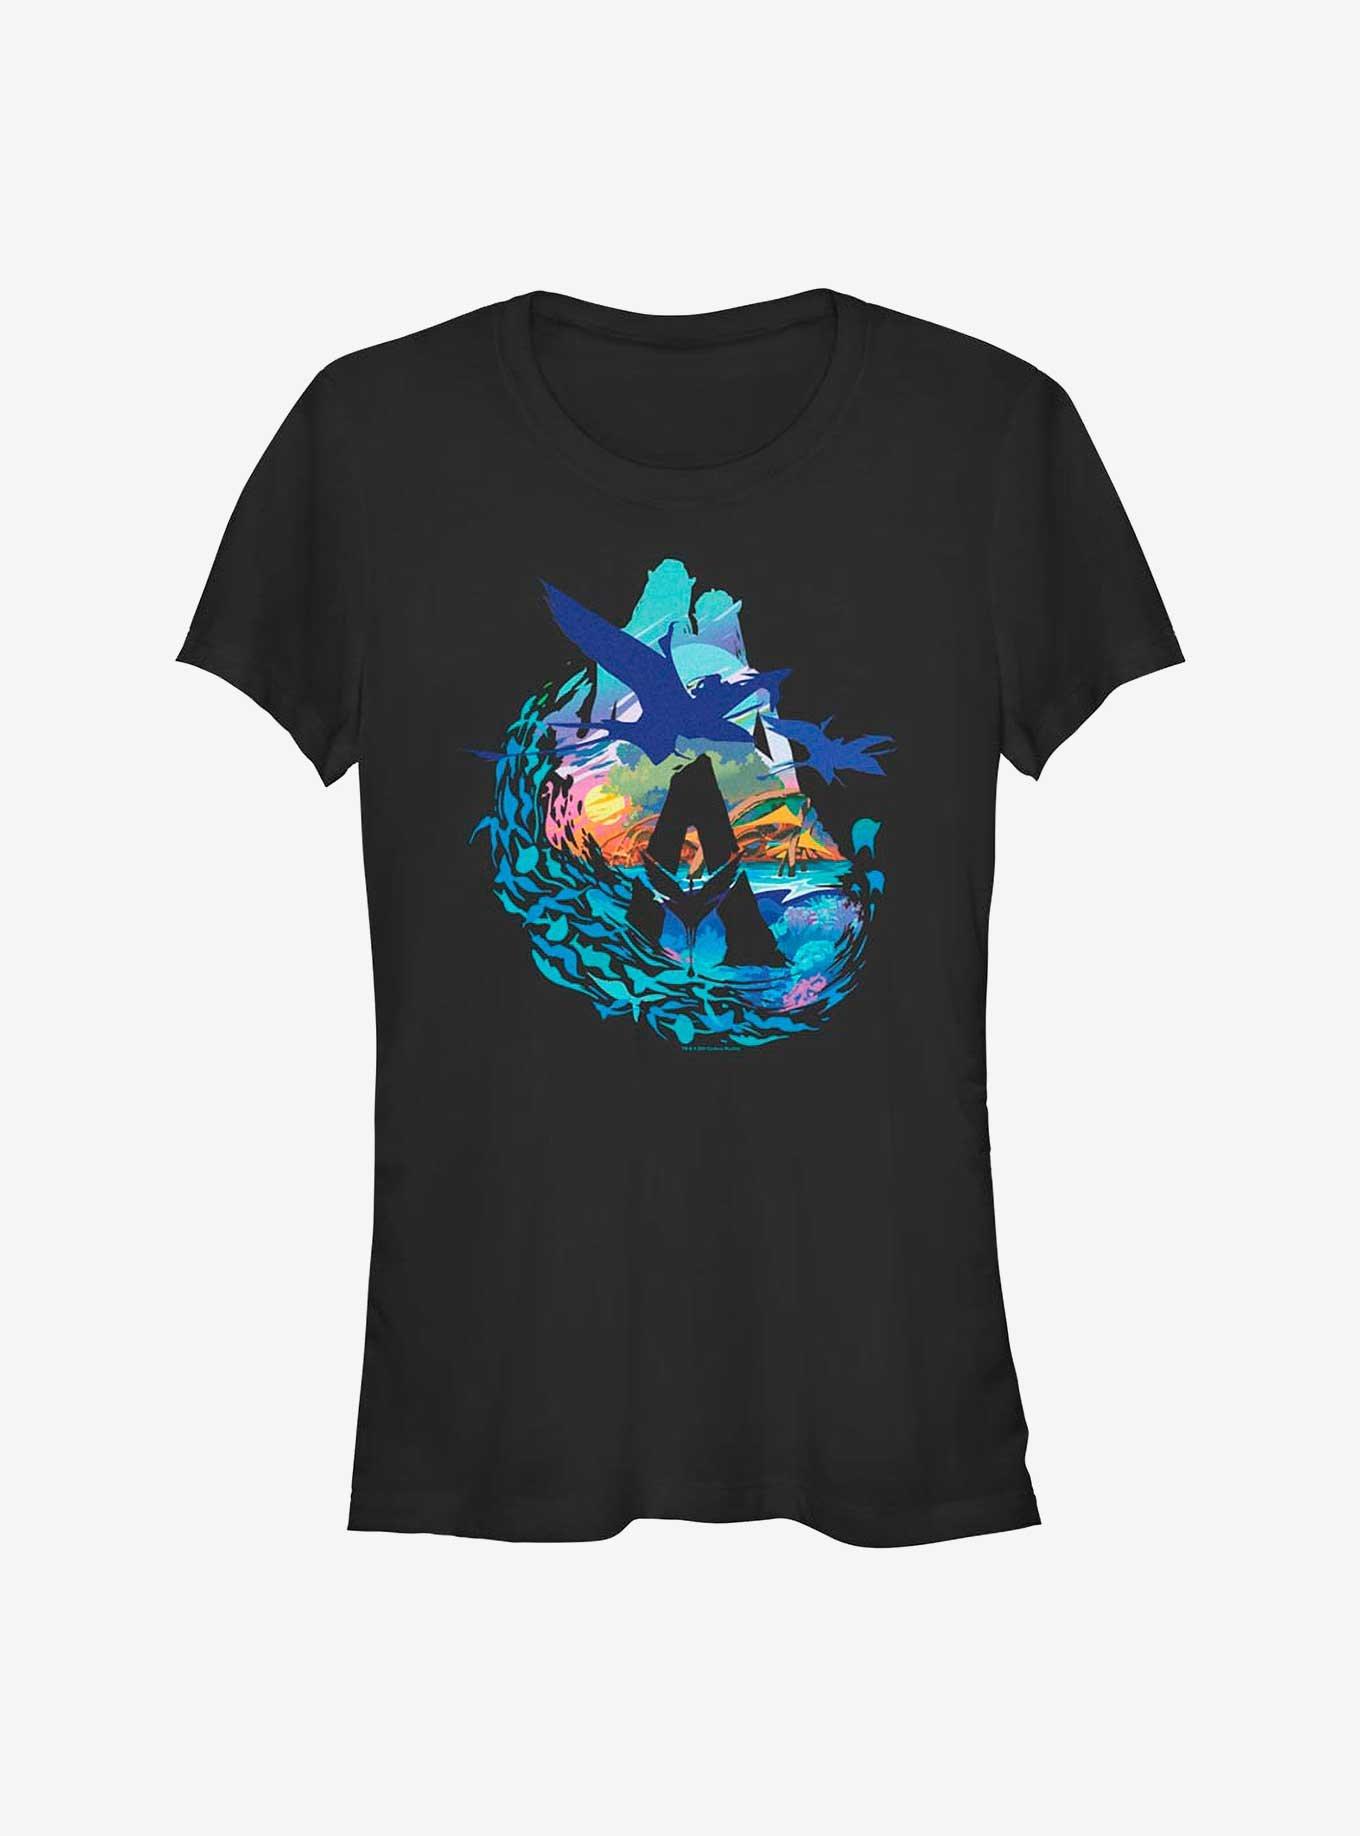 Avatar: The Way of Water Scenic Flyby Girls T-Shirt, BLACK, hi-res